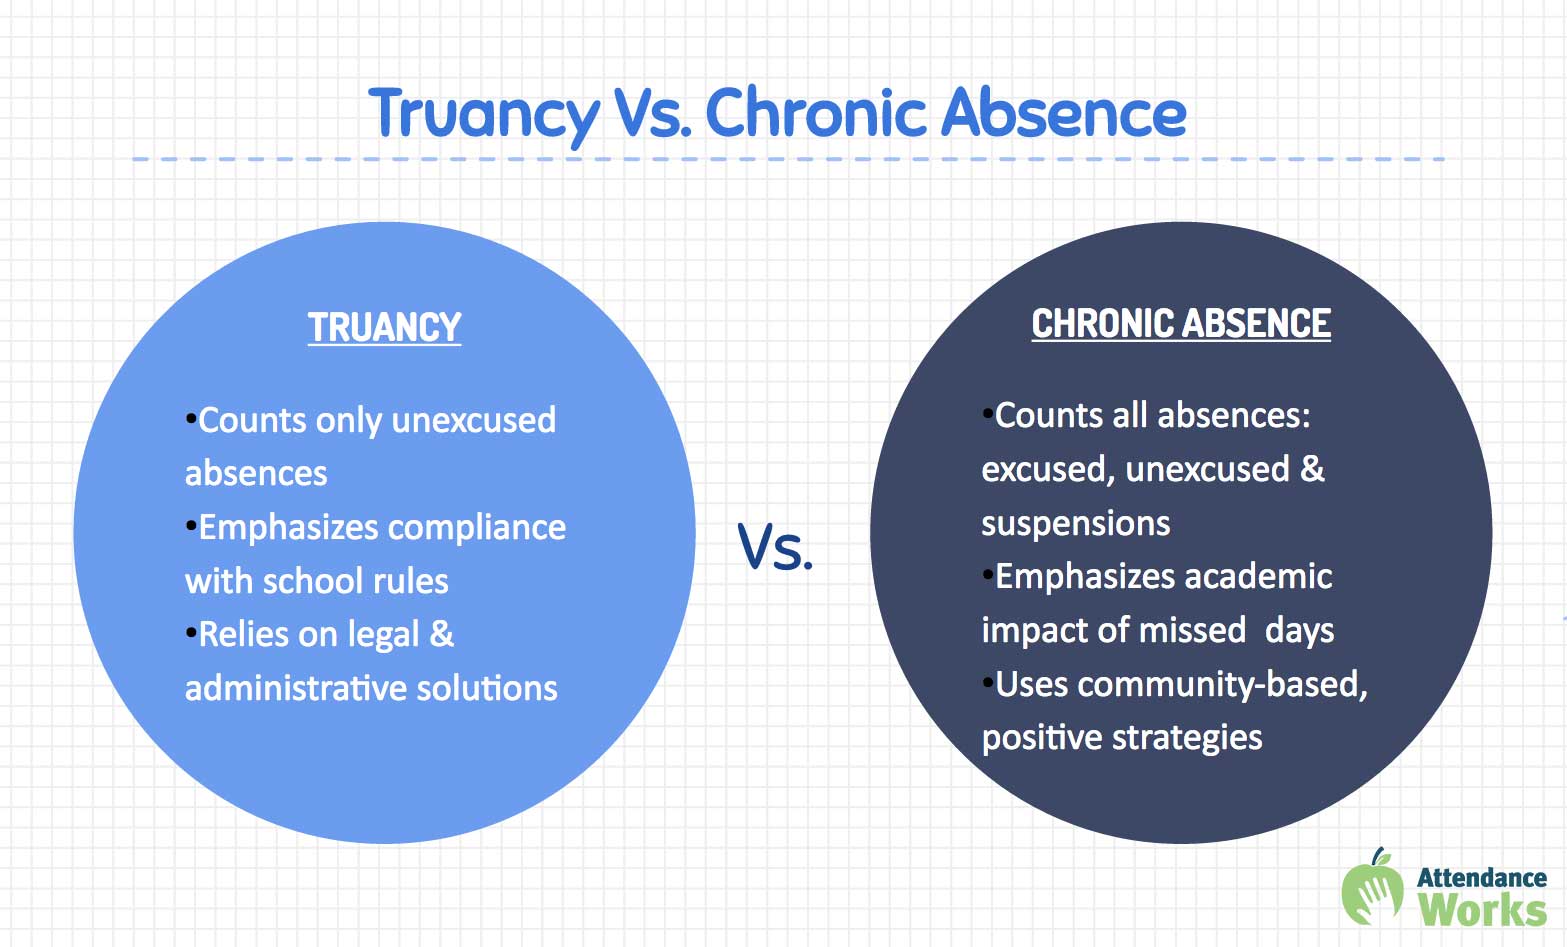 chart about truancy and absences 